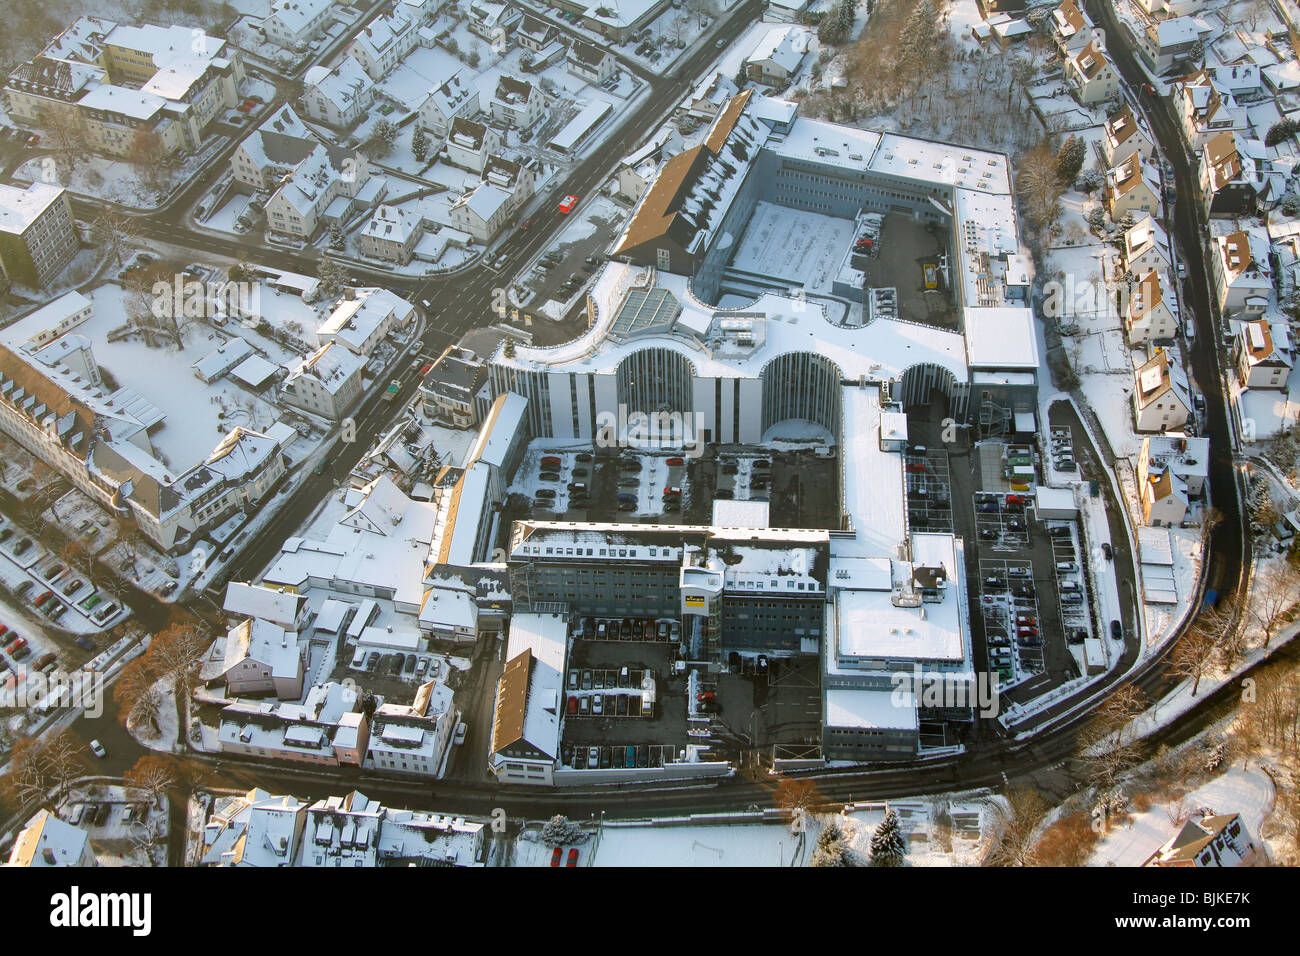 Aerial photo, medium-sized business Viega in the snow in winter, Attendorn, North Rhine-Westphalia, Germany, Europe Stock Photo